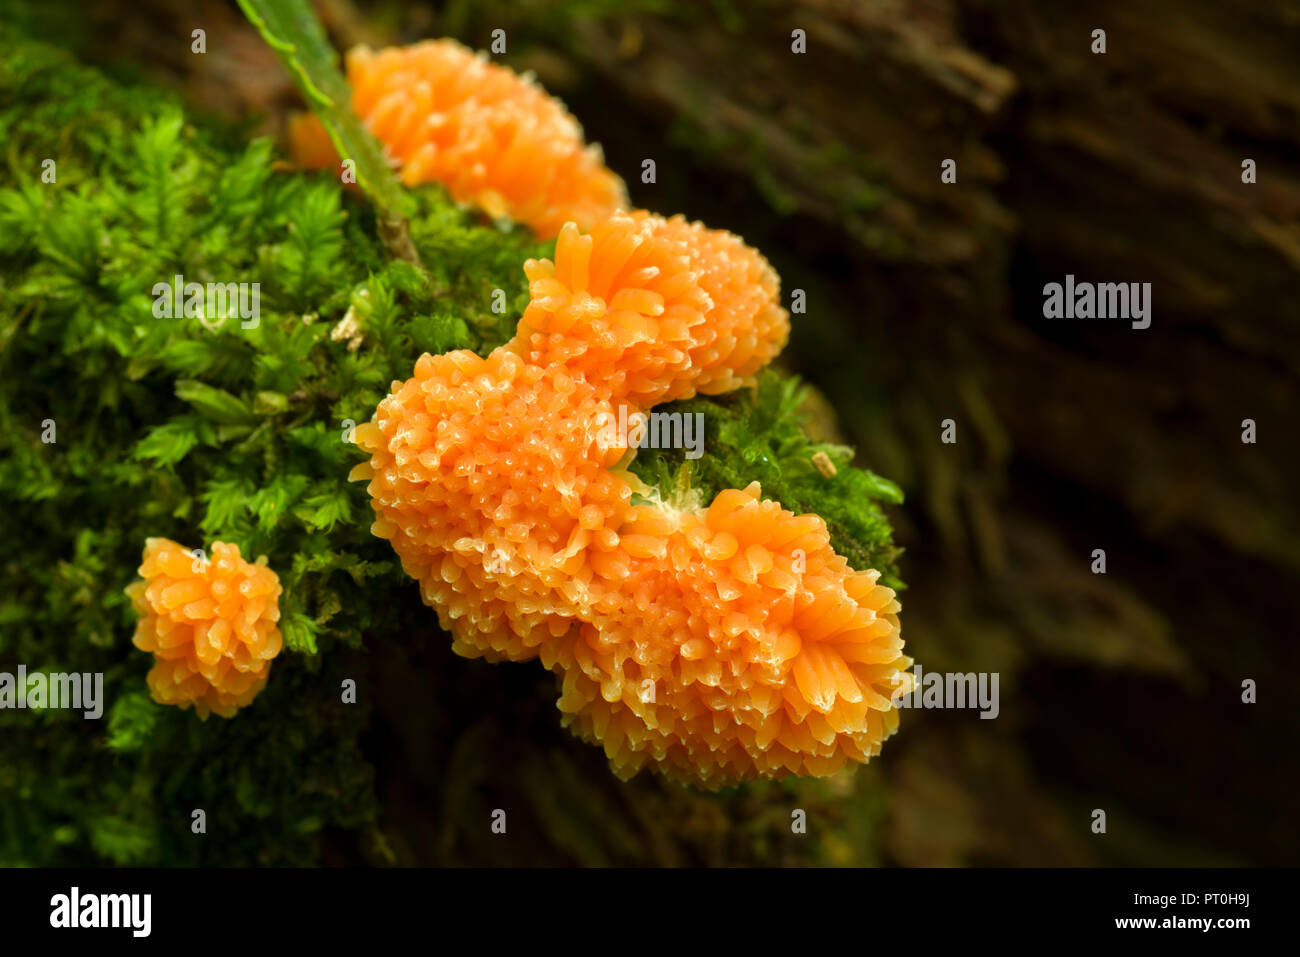 Tubulifera arachnoidea slime mould in its plasmodium stage on a rotting log. Goblin Combe, North Somerset, England. Stock Photo